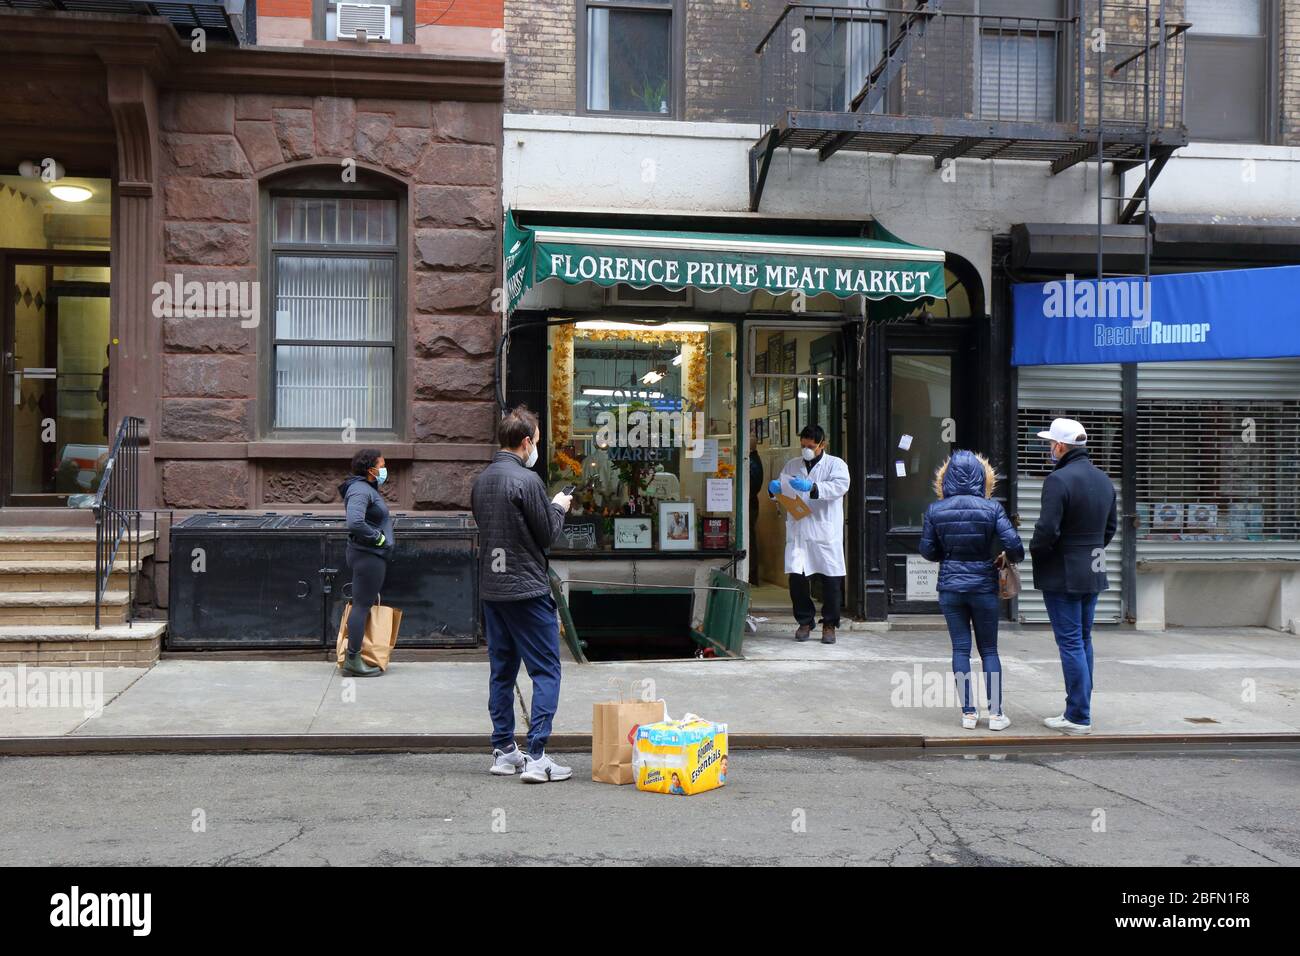 People social distancing and wearing masks as they wait to enter a butcher shop during coronavirus COVID-19. New York, April 18, 2020. Stock Photo